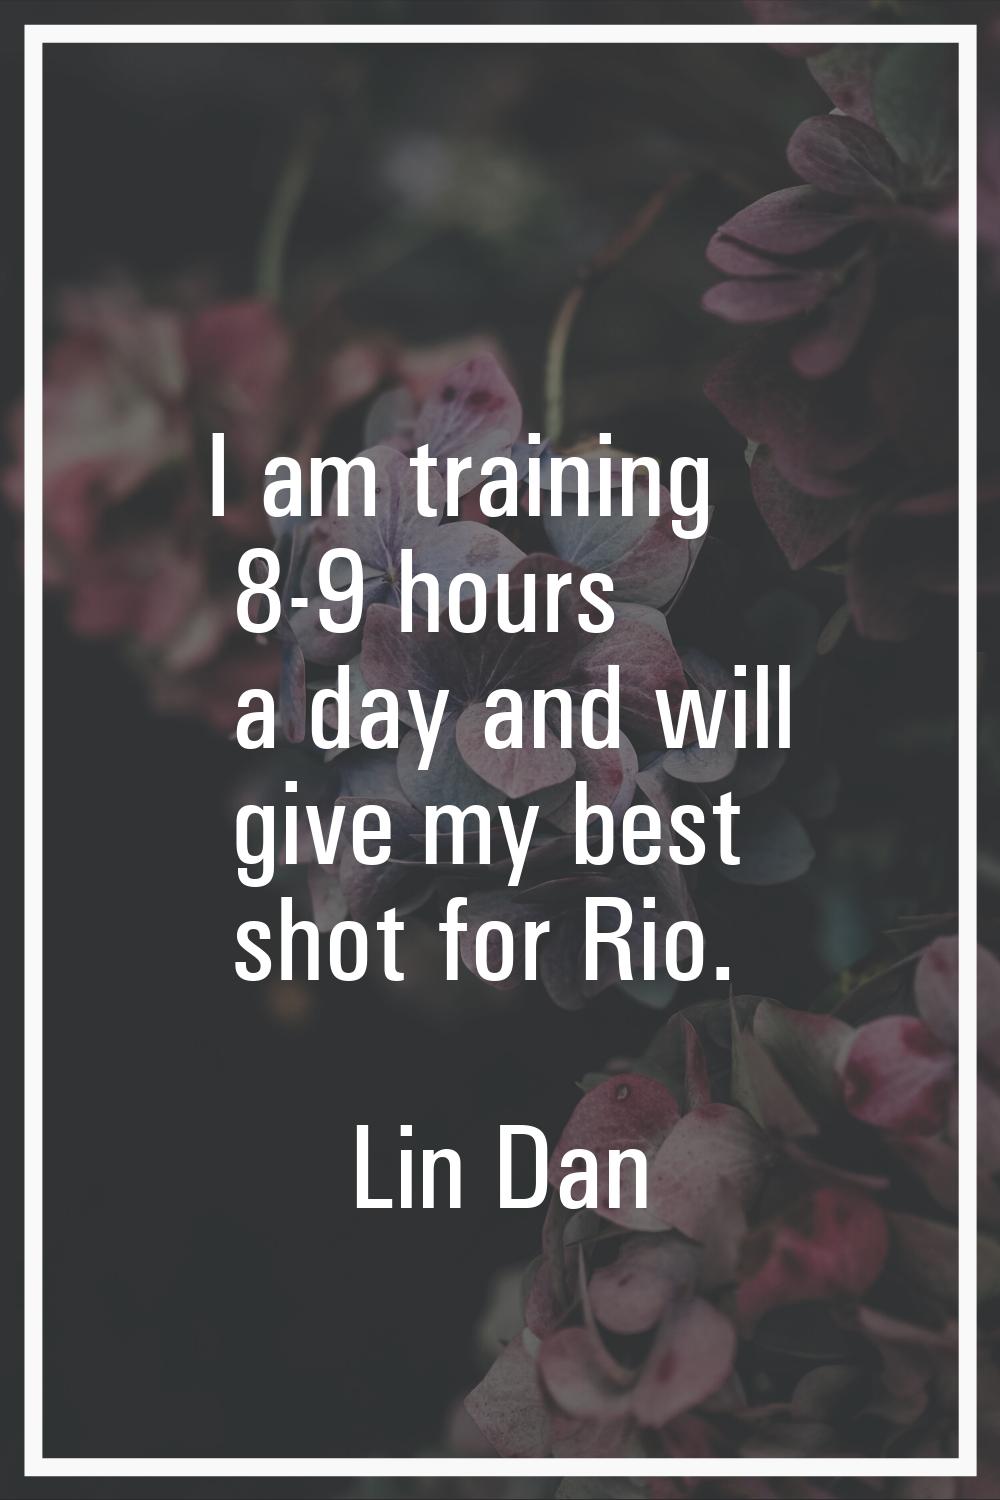 I am training 8-9 hours a day and will give my best shot for Rio.